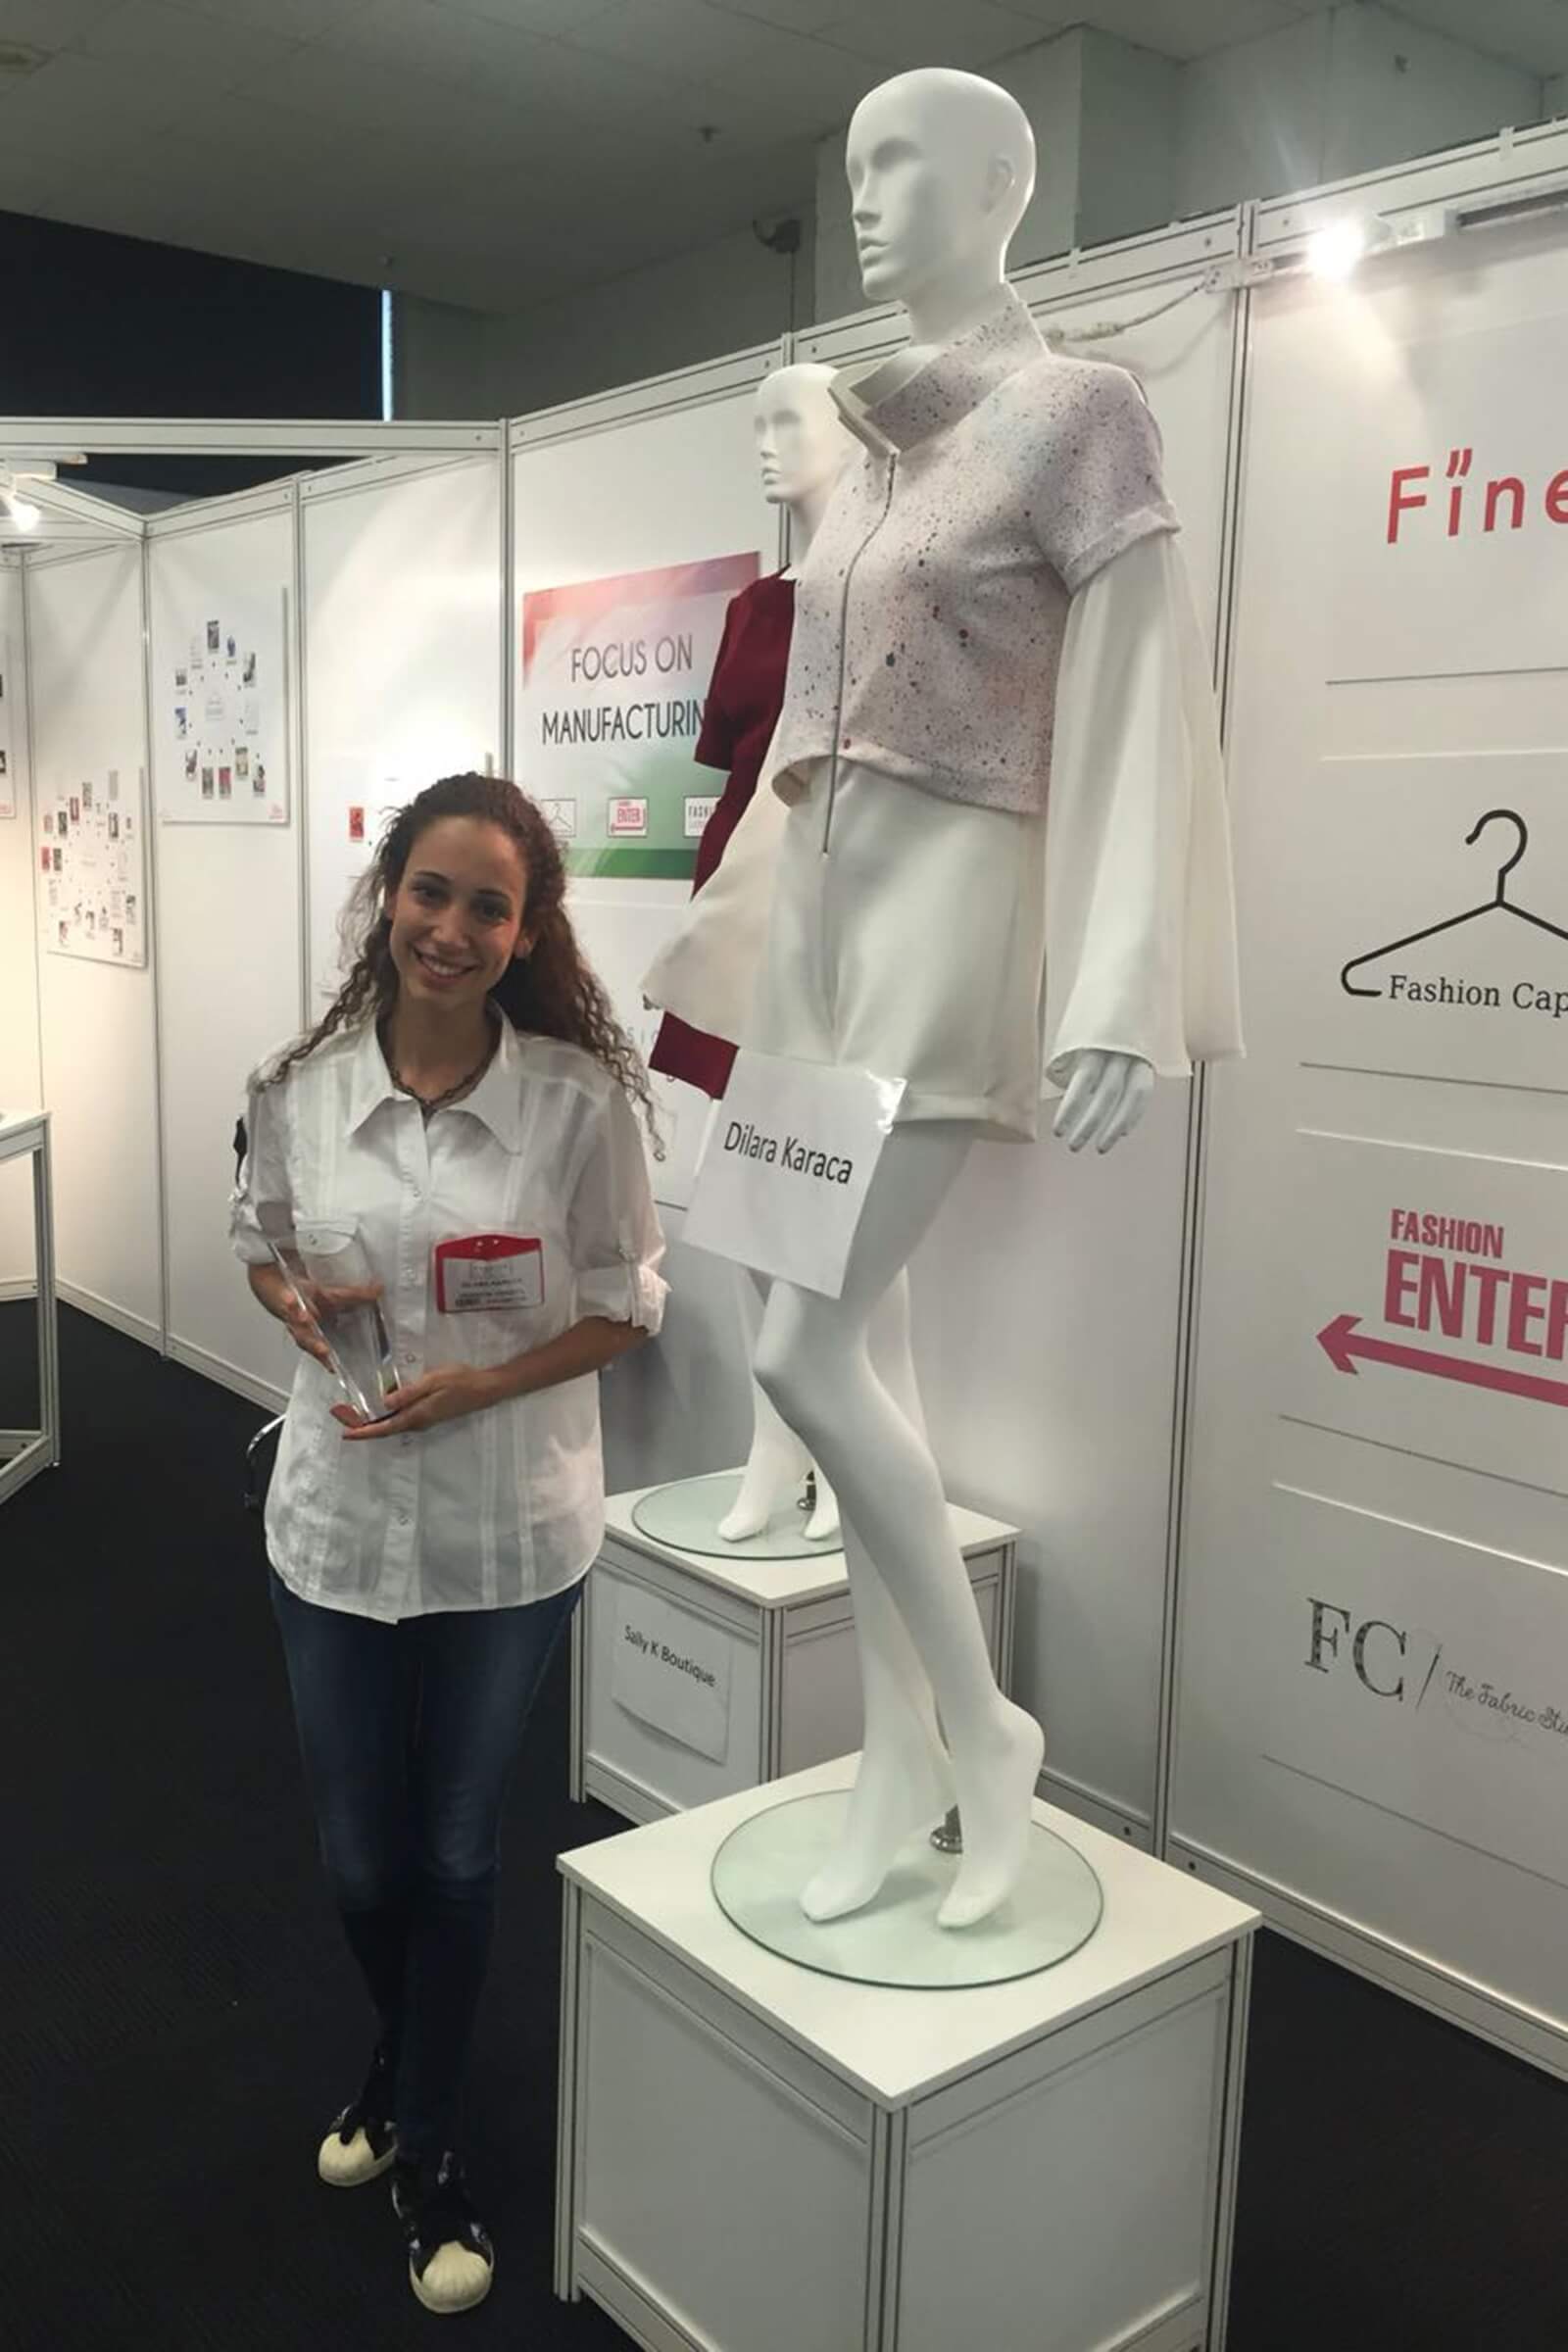 IZMIR GETS ANOTHER FIRST PRIZE IN FASHION